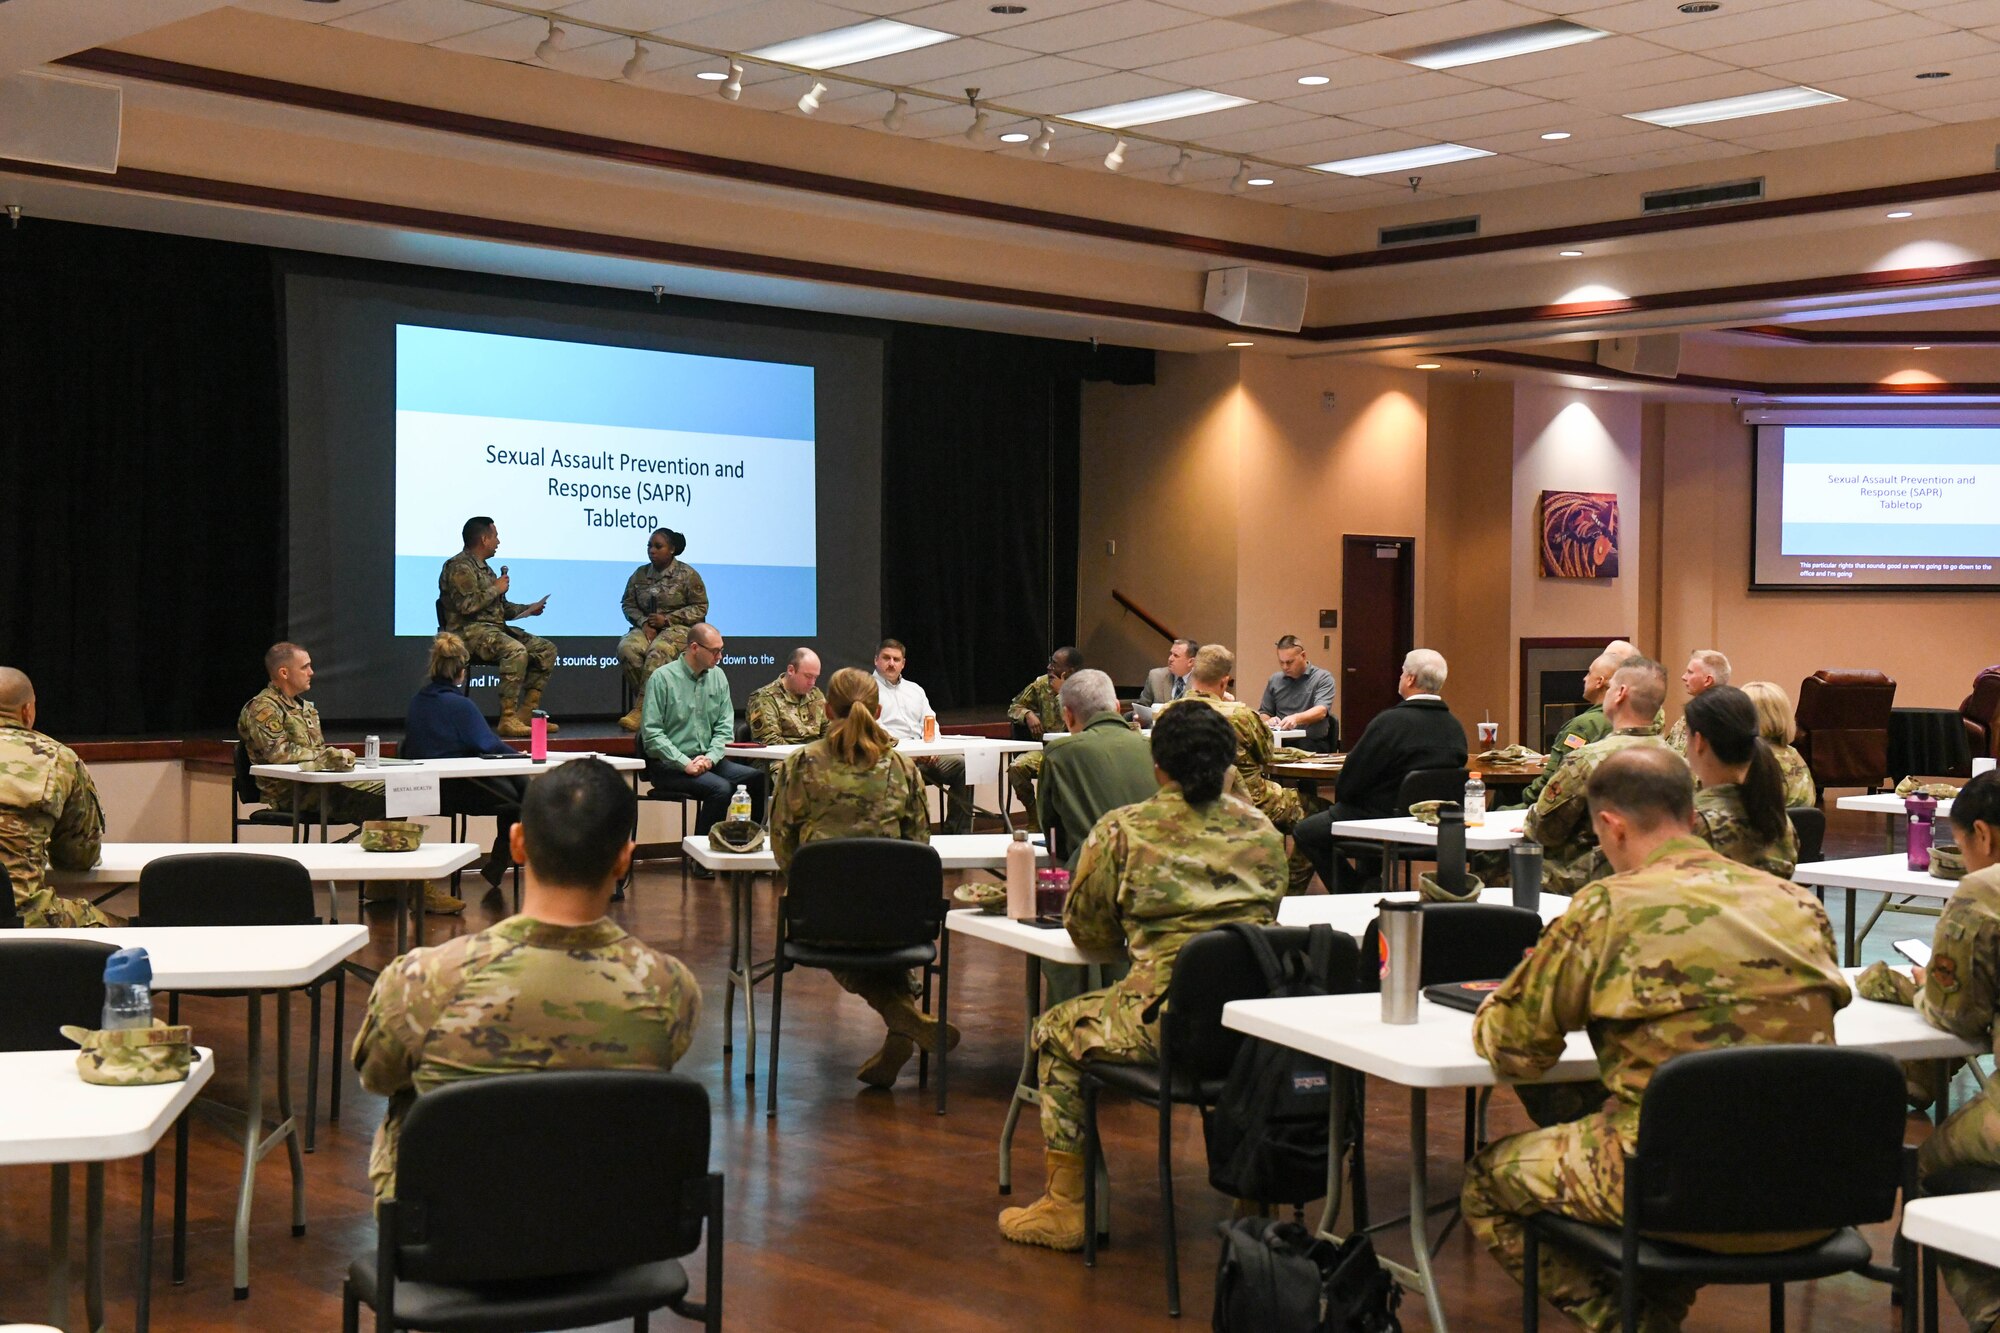 97th Air Mobility Wing leaders listen to a sexual assault scenario during Sexual Assault Prevention and Response training at Altus Air Force Base, Oklahoma, April 7, 2022. During the training, leaders learned about the different departments directly involved in a sexual assault case and the roles and responsibilities they have. (U.S. Air Force photo by Airman 1st Class Trenton Jancze)